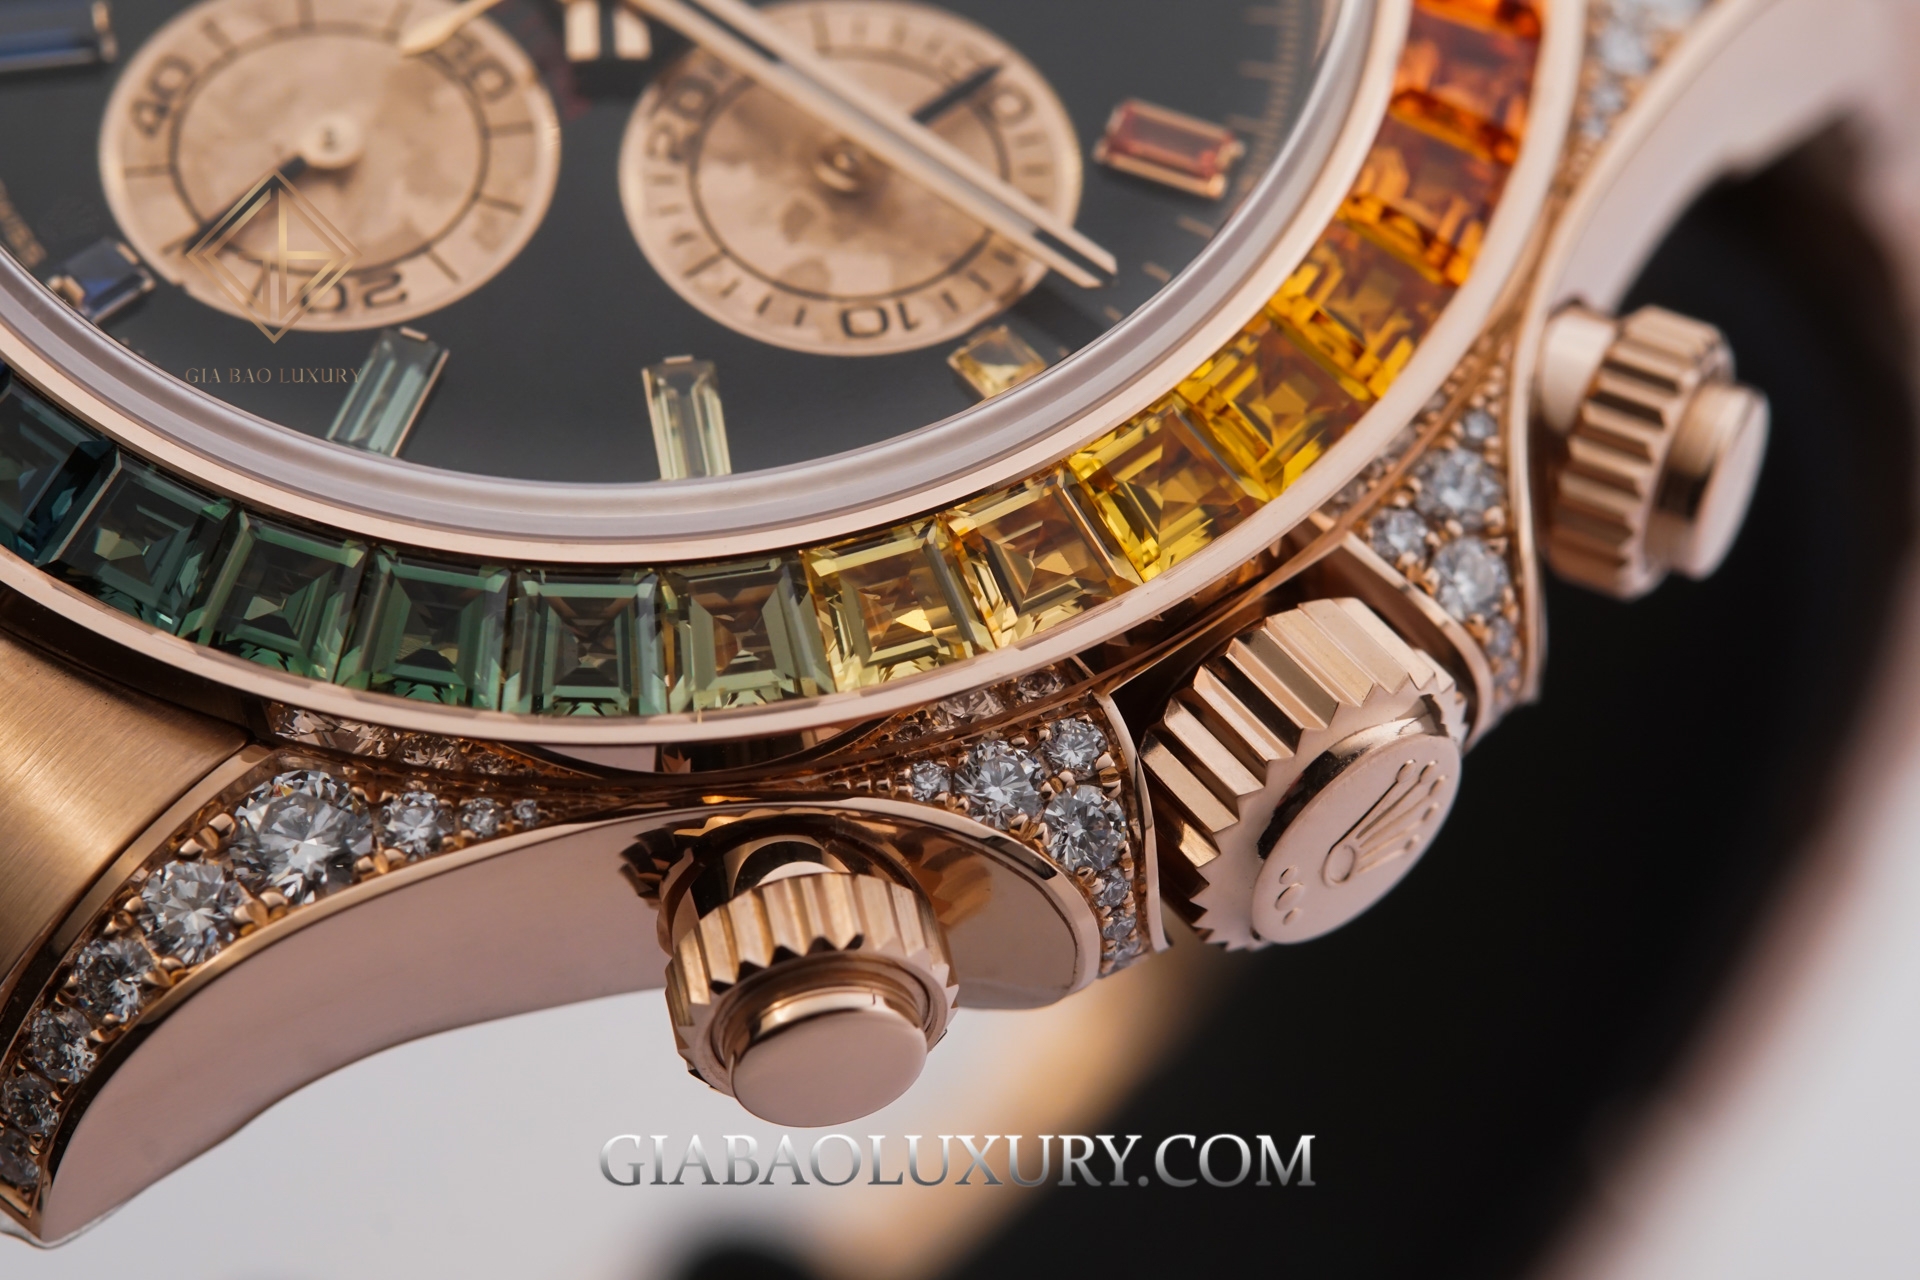 Review Đồng Hồ Rolex Cosmograph Daytona "Rainbow" 116595RBOW